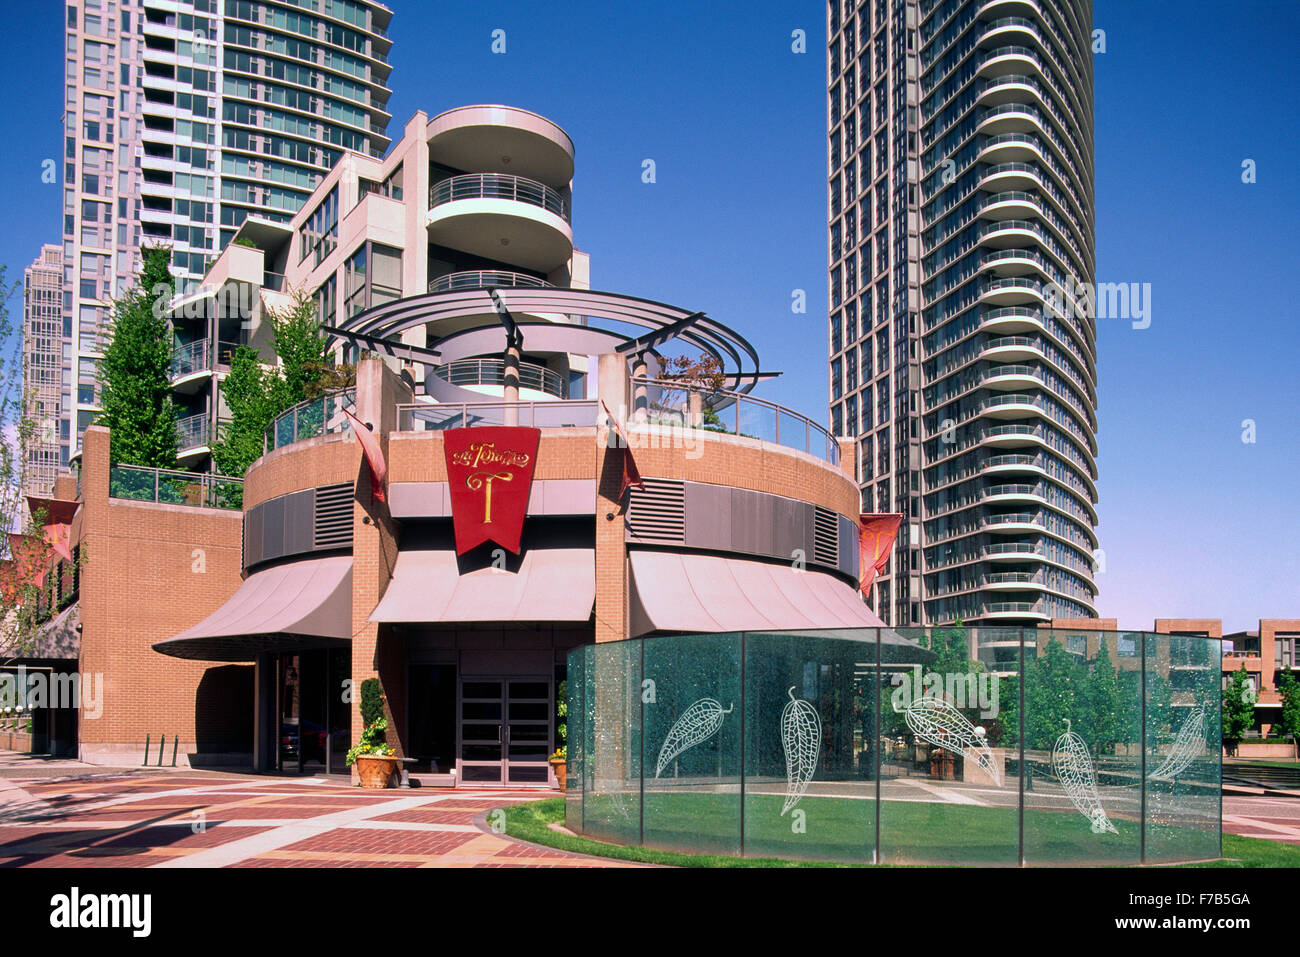 Yaletown, Vancouver, BC, British Columbia, Canada - Italian Restaurant and Highrise Condominium Buildings, Downtown City, Summer Stock Photo